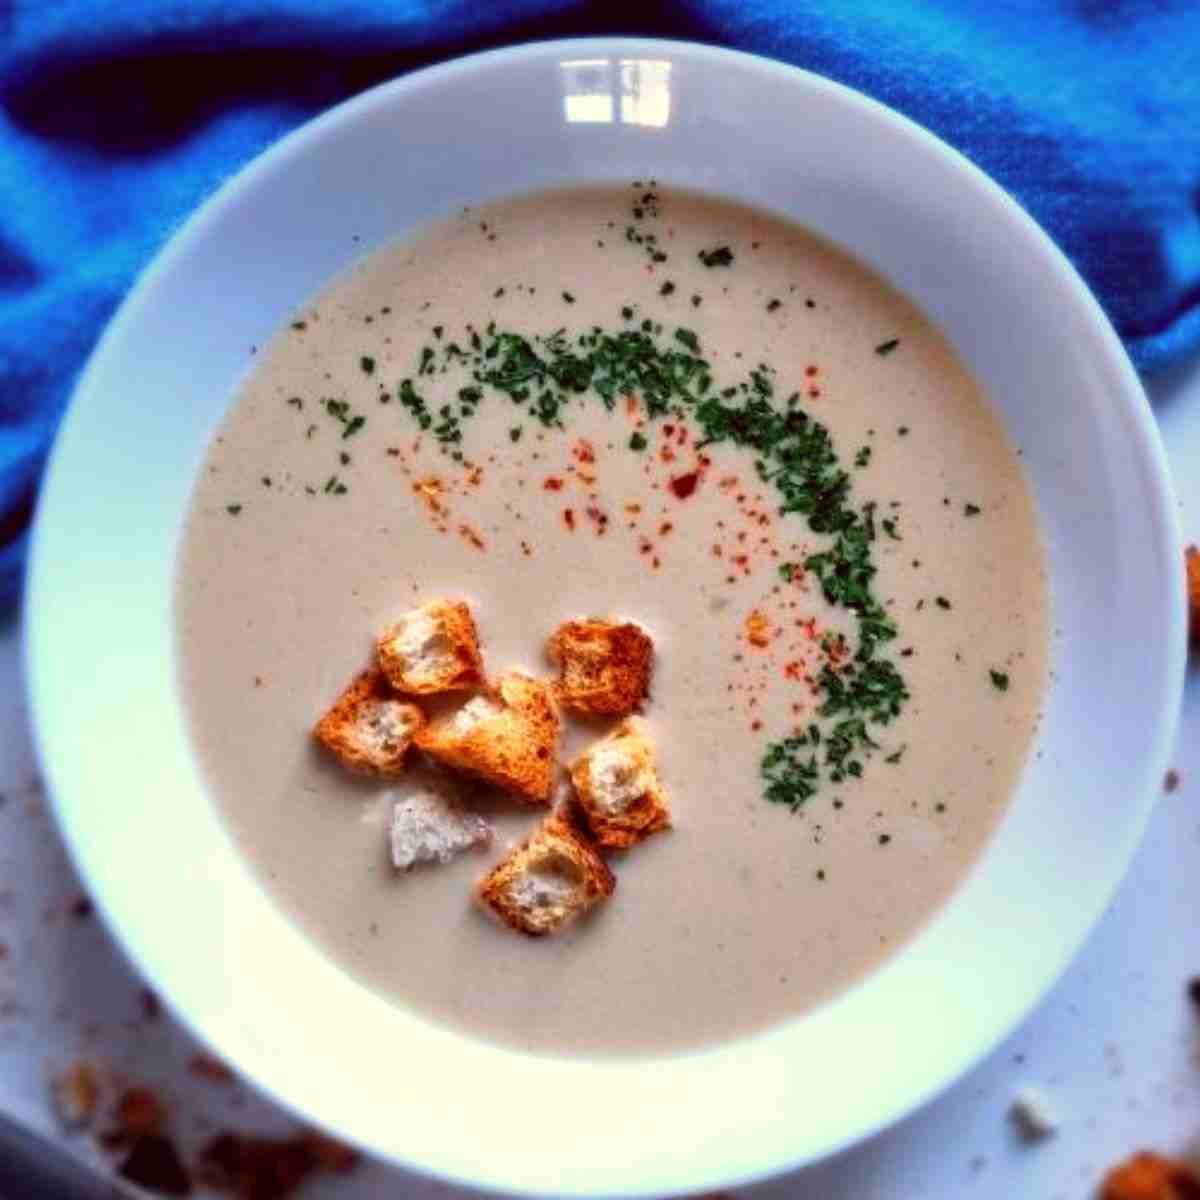 Garlic soup with croutons and green herbs in a white plate on a white table.